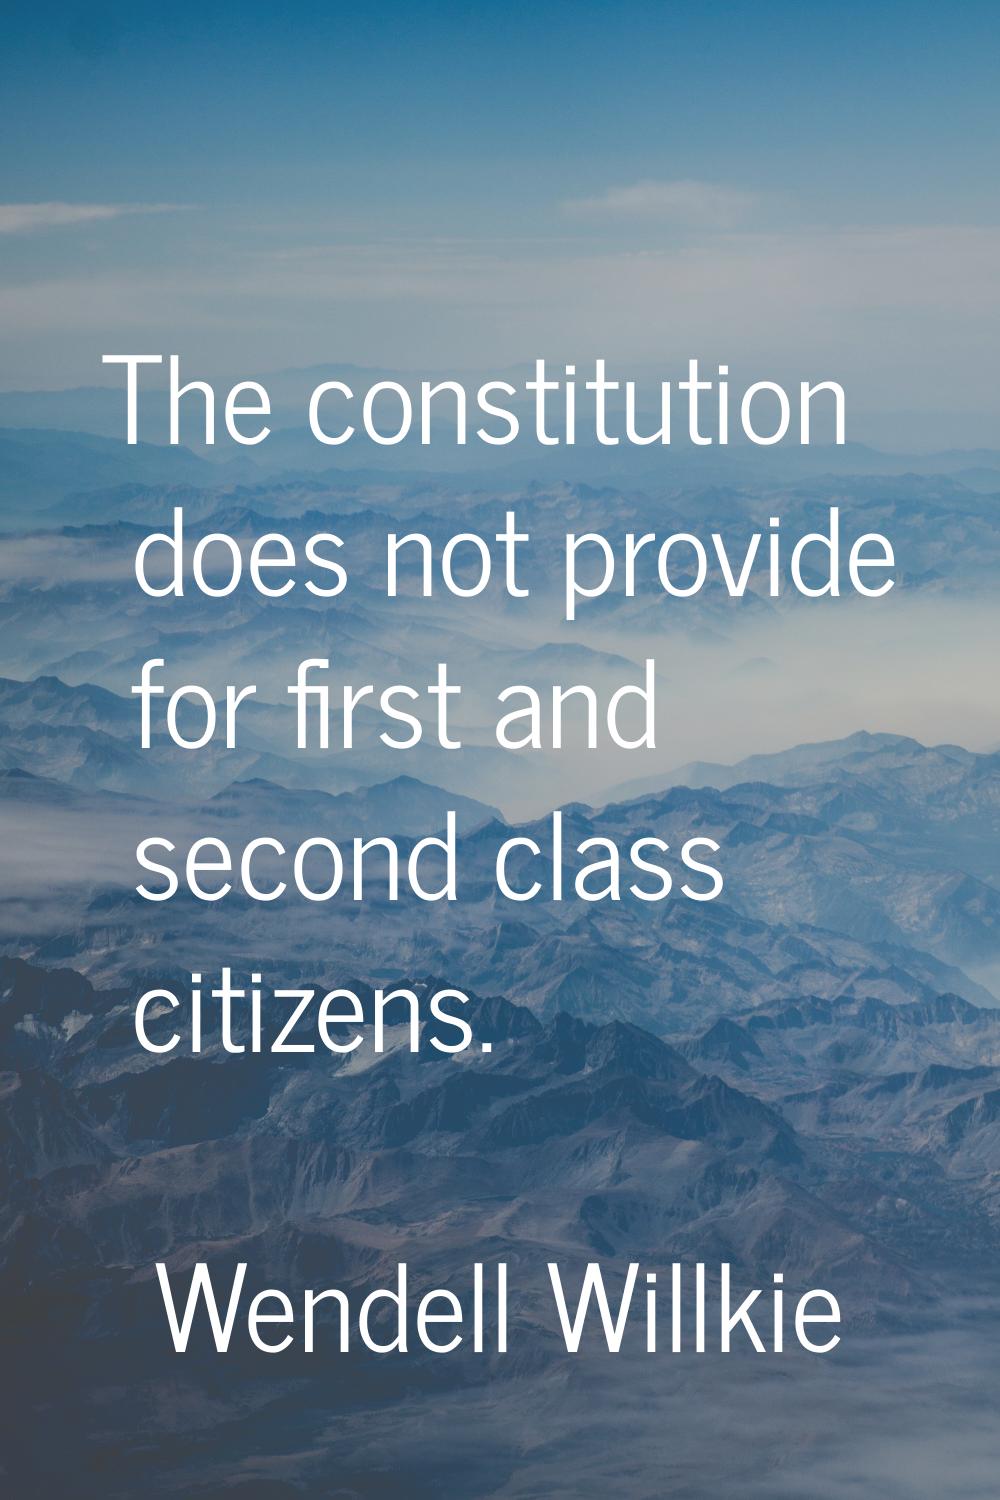 The constitution does not provide for first and second class citizens.